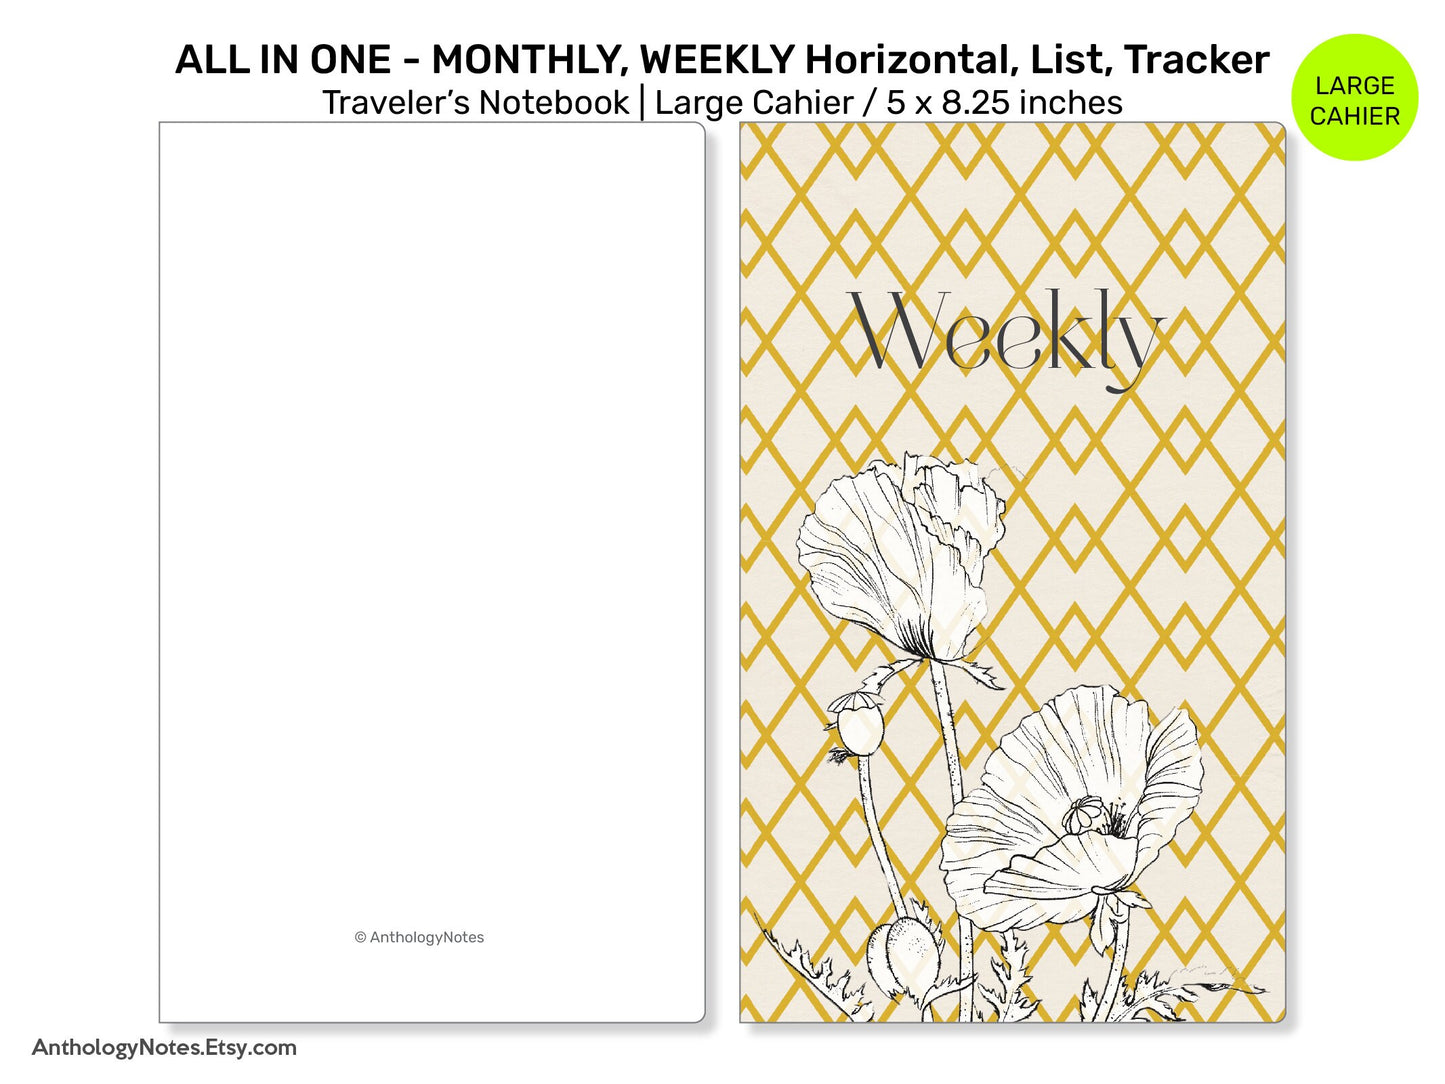 CAHIER TN Weekly GRID Insert Traveler's Notebook Vertical Wo4P Printable Planner with Tracker MCL003